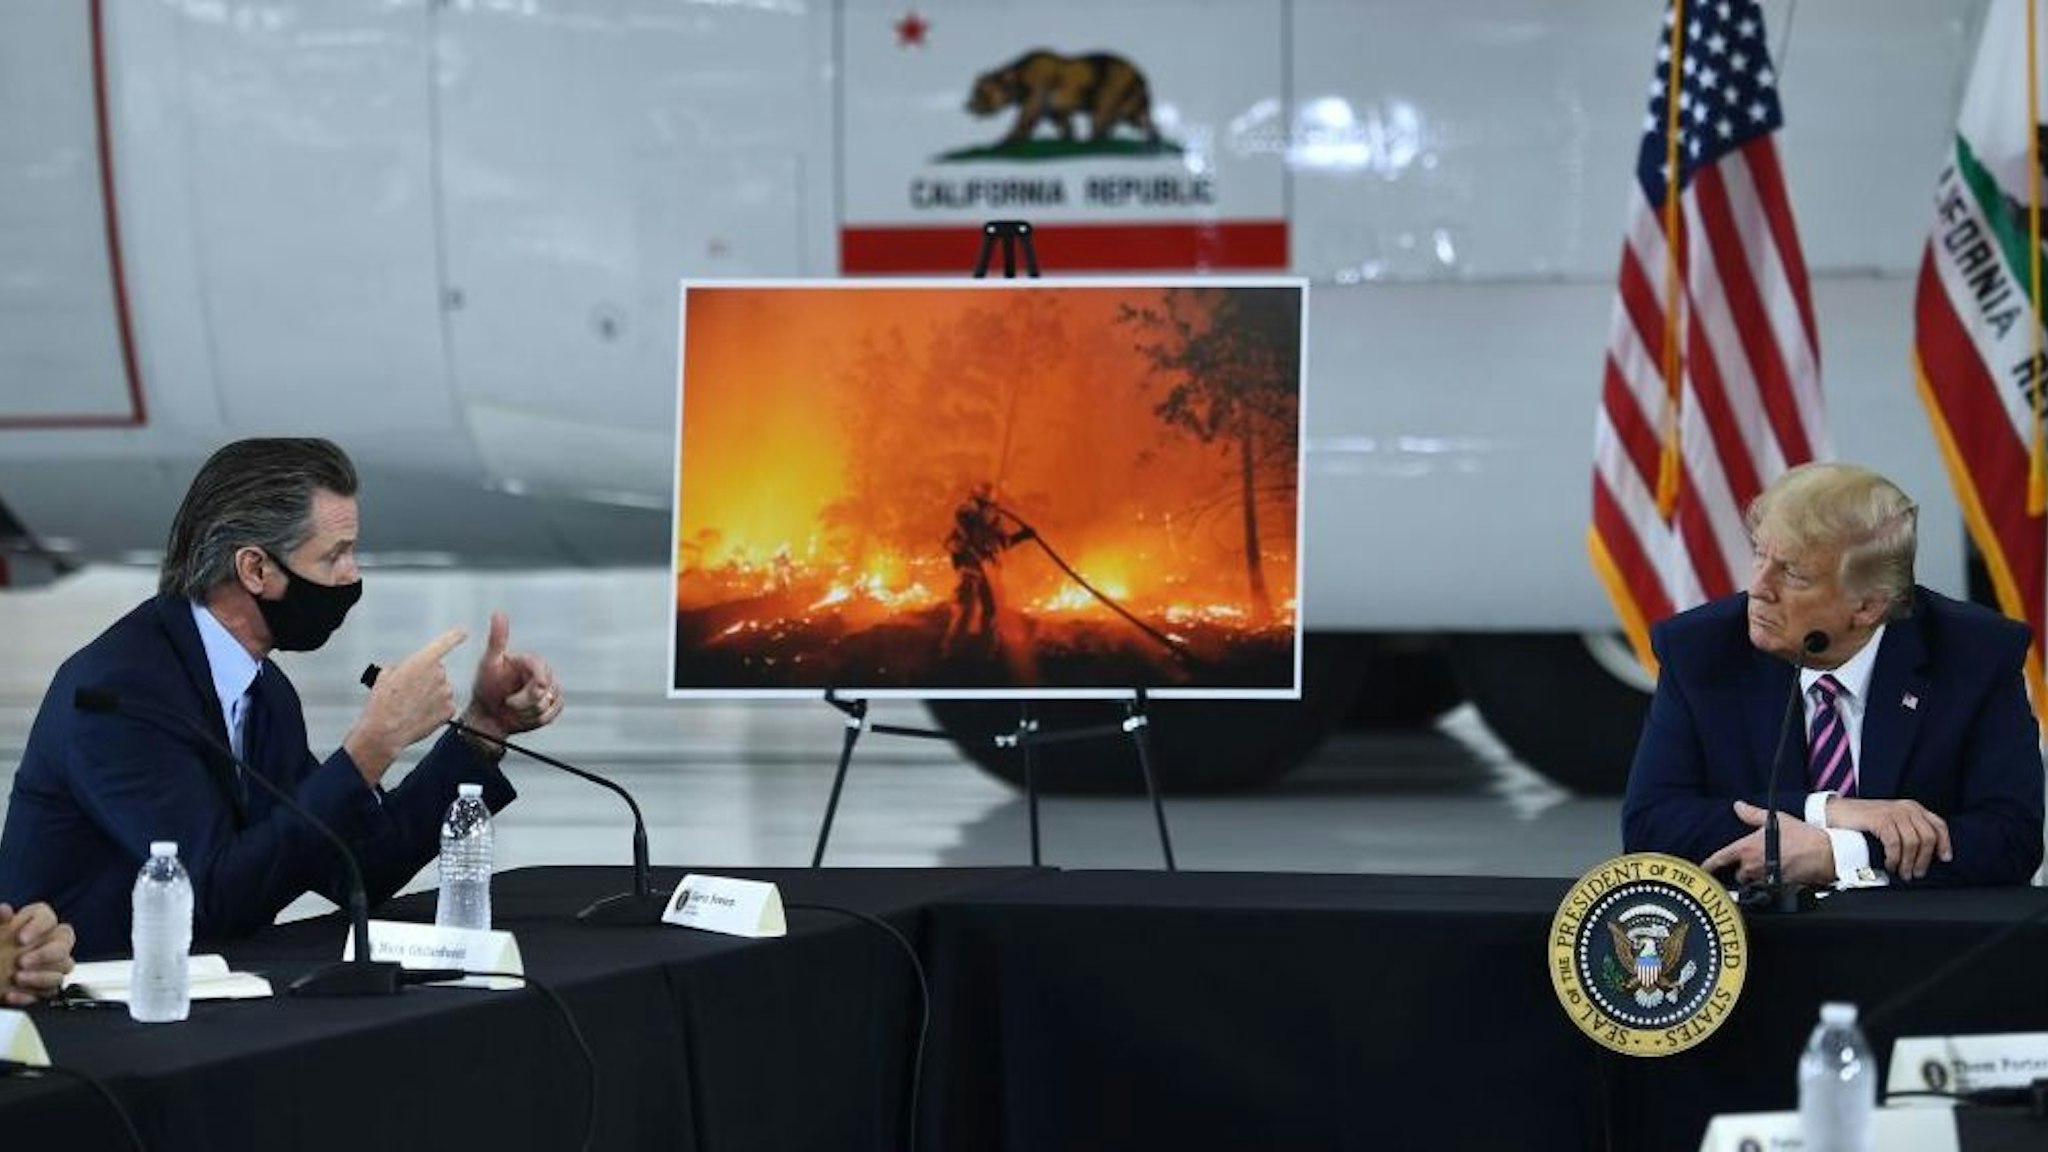 US President Donald Trump(R) speaks to California Governor Gavin Newsom(D-CA) at Sacramento McClellan Airport in McClellan Park, California on September 14, 2020 during a briefing on wildfires. (Photo by Brendan Smialowski / AFP)